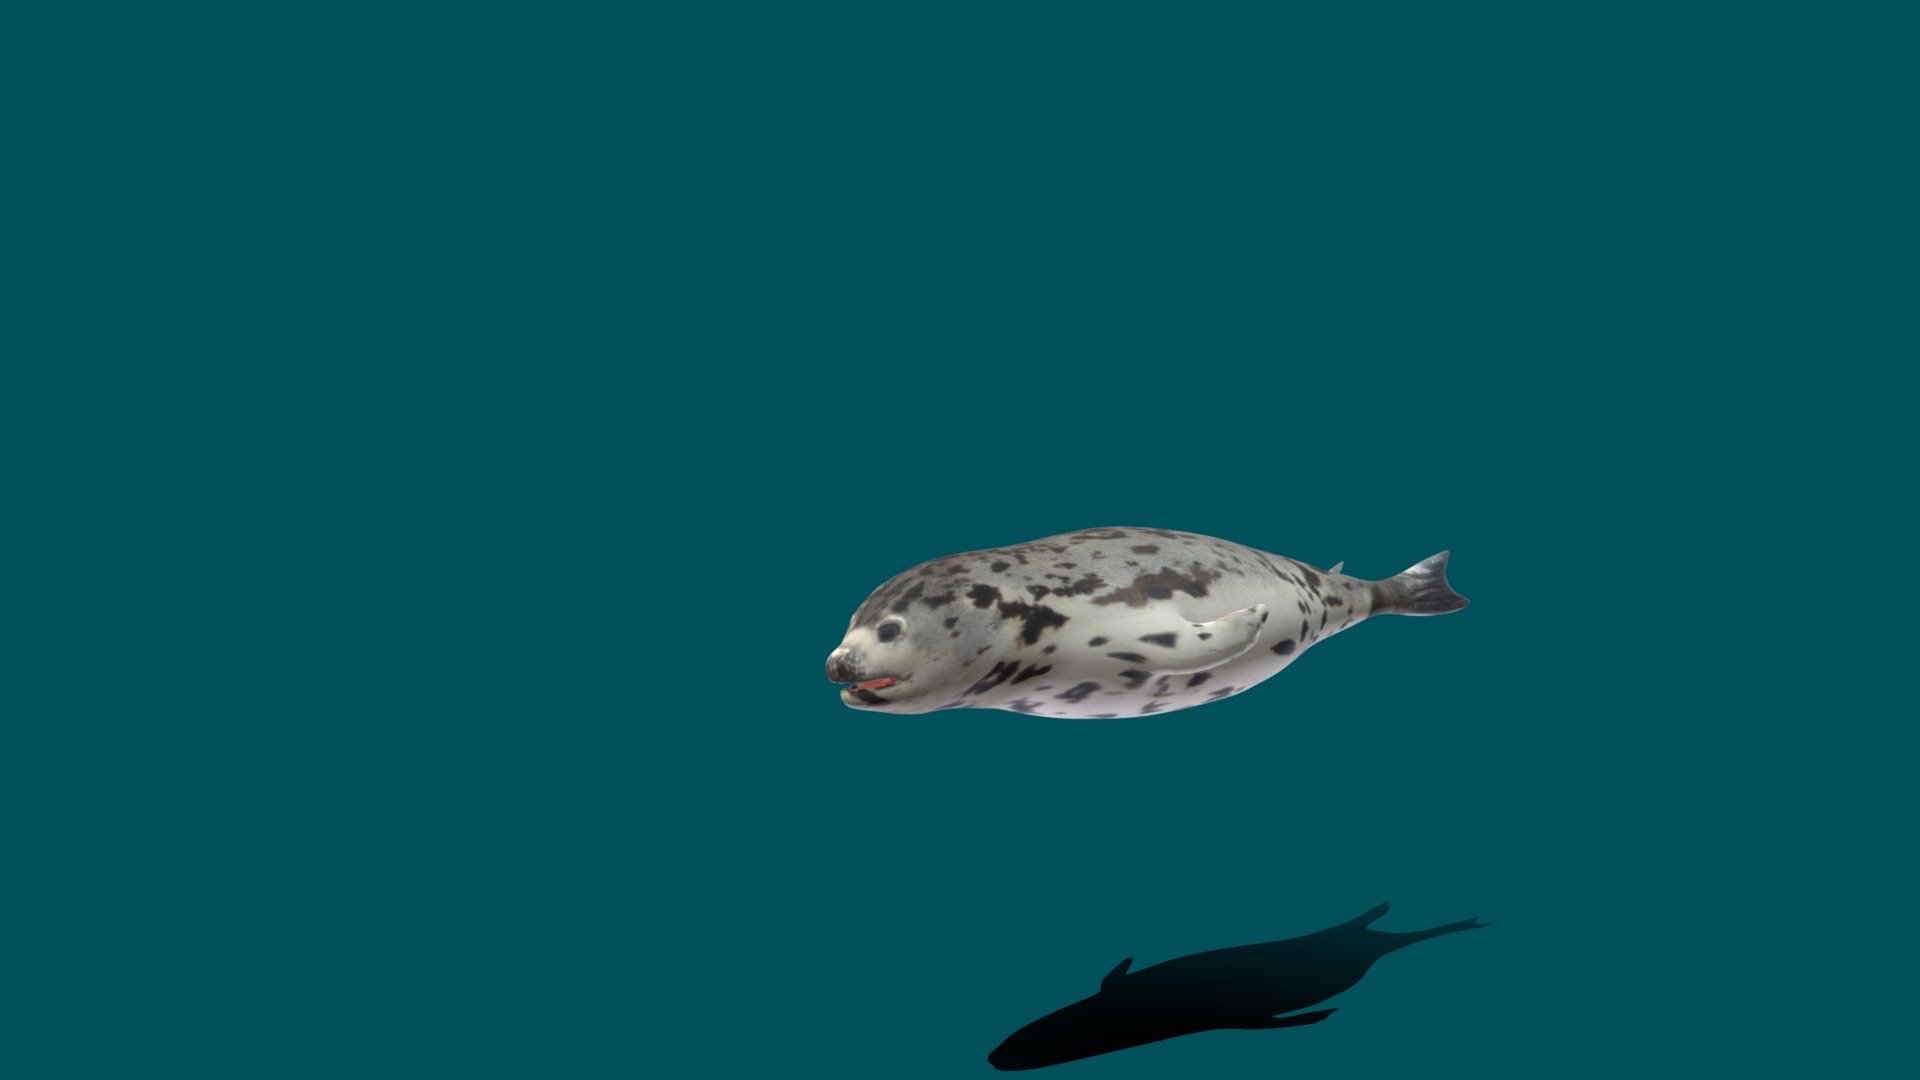 Harp Seal Pagophilus_groenlandicus Lowpoly 
4K Textures (idle swim animation)
Seal_Diffuse
Seal_Metallic
Seal_AO
Seal_Roughness
Seal_Normal
Seal_Height (evee)
Seal_Smoothness 
Seal_Edge

The harp seal, also known as Saddleback Seal or Greenland Seal, is a species of earless seal, or true seal, native to the northernmost Atlantic Ocean and Arctic Ocean. Originally in the genus Phoca with a number of other species, it was reclassified into the monotypic genus Pagophilus in 1844. Wikipedia
Scientific name: Pagophilus_groenlandicus - Harp Seal (Lowpoly) - 3D model by Nyilonelycompany 3d model